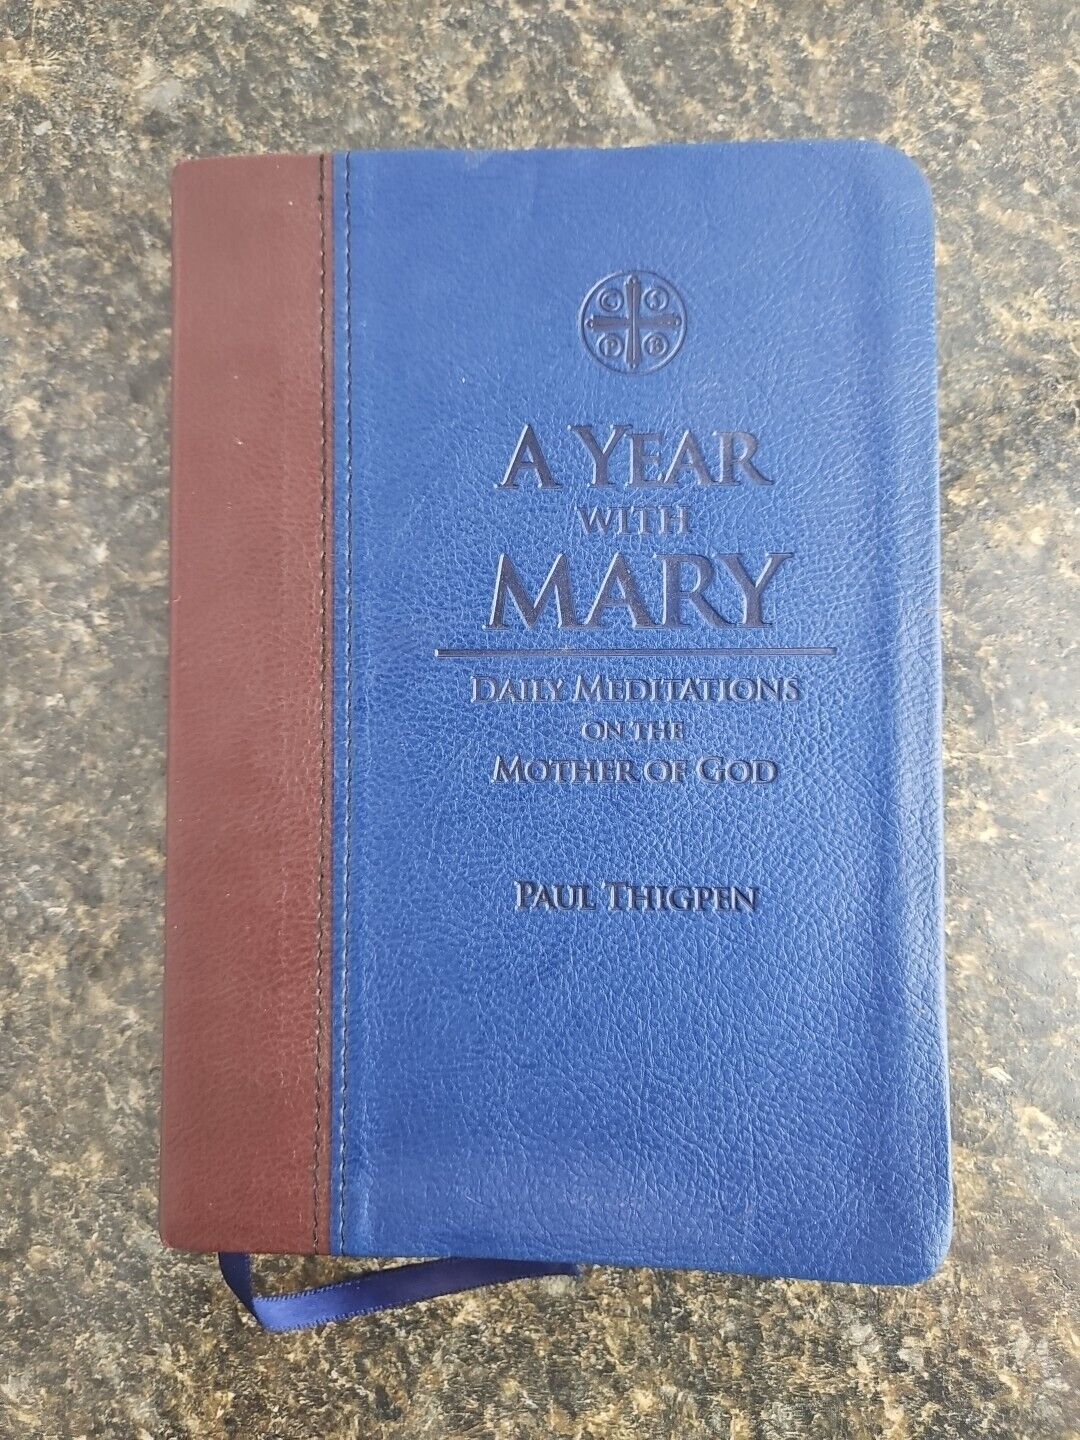 A Year with Mary : Daily Meditations on the Mother of God by Paul Thigpen (2015,